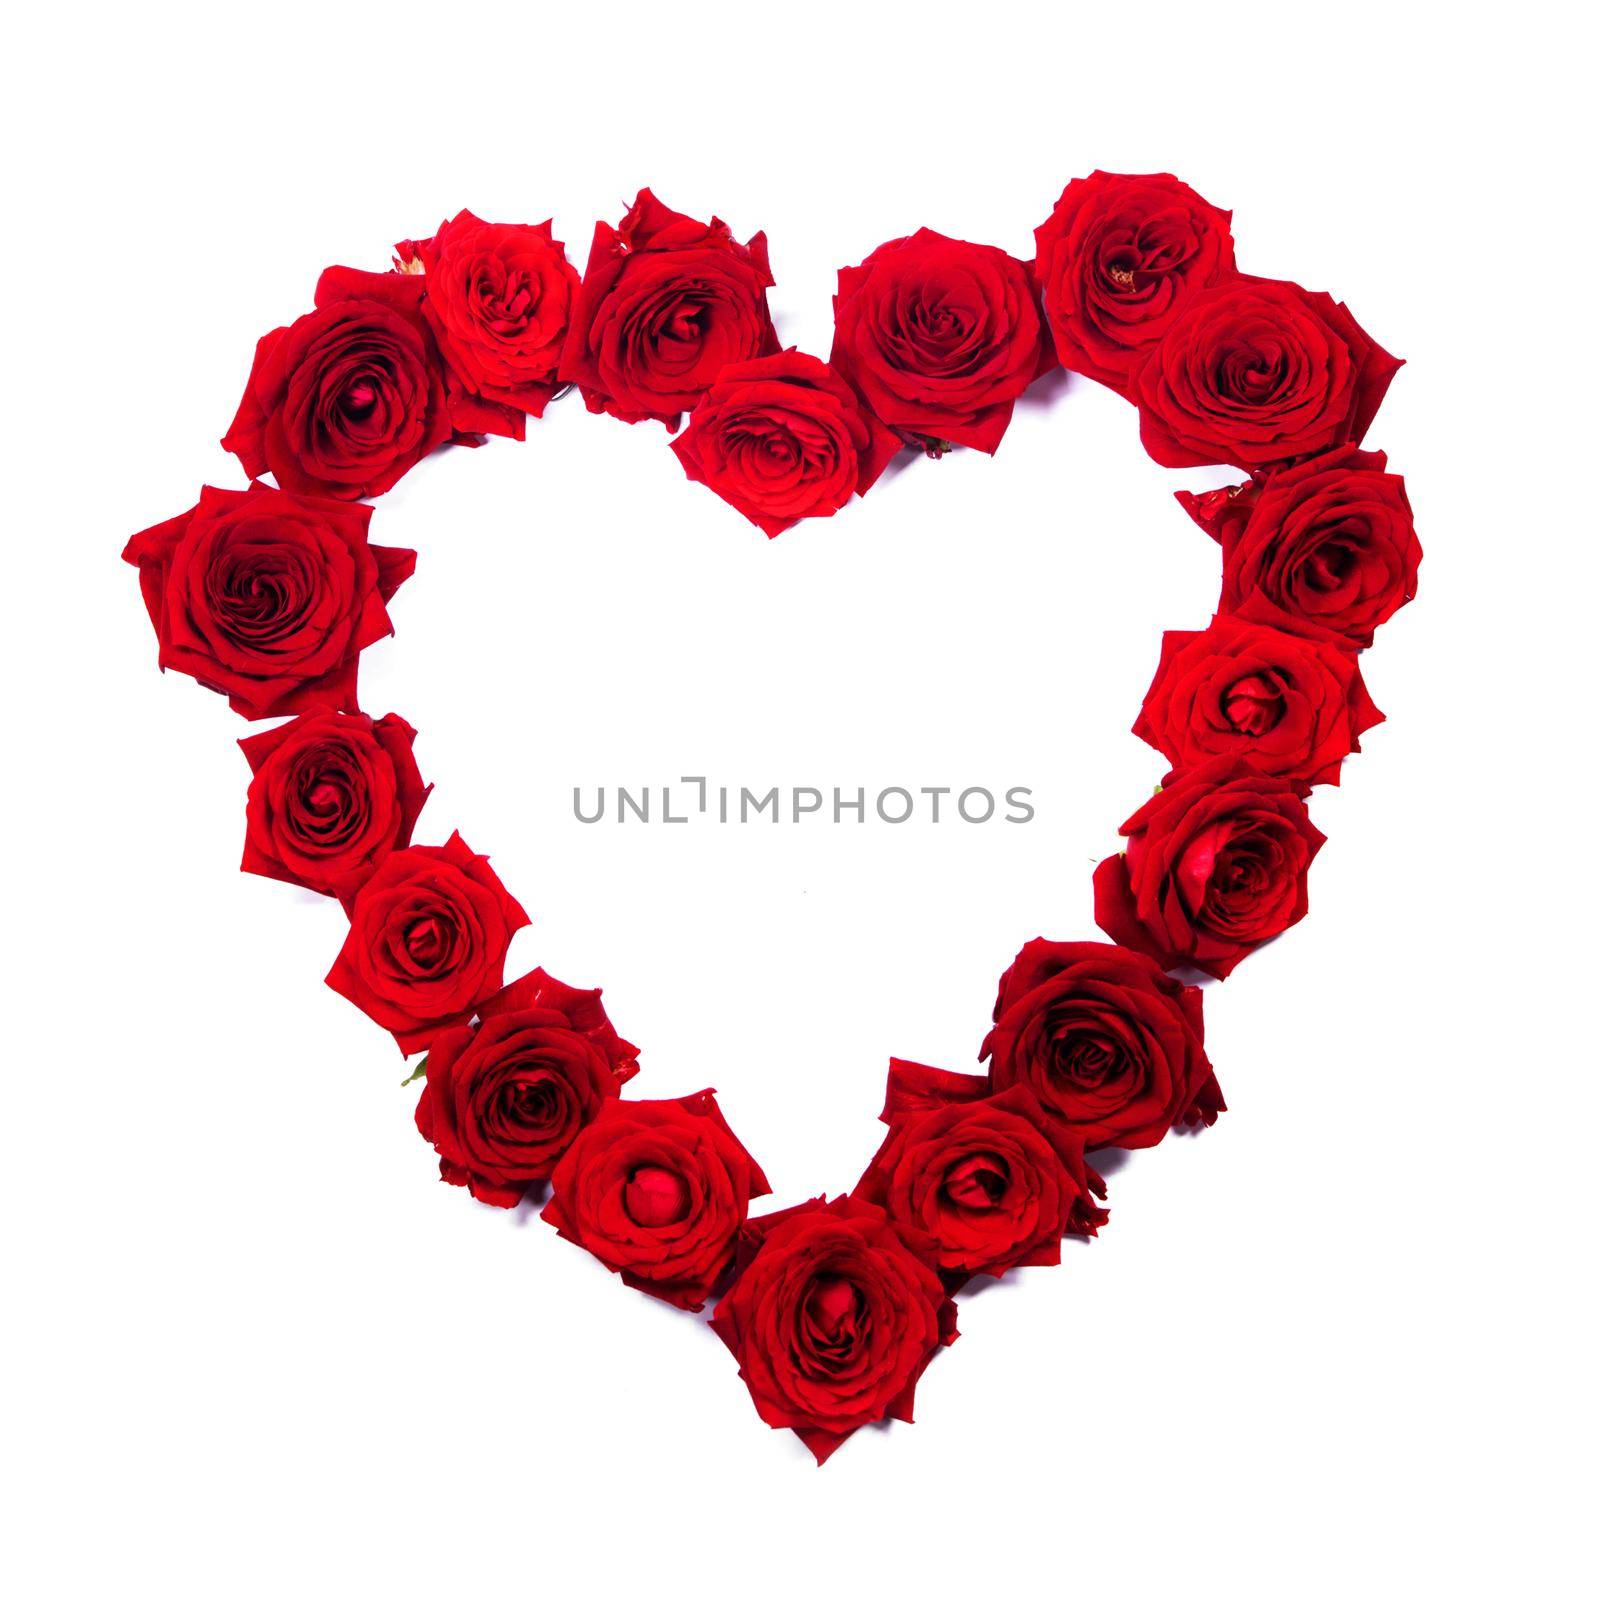 Rose flowers heart shape isolated on white background Valentine day